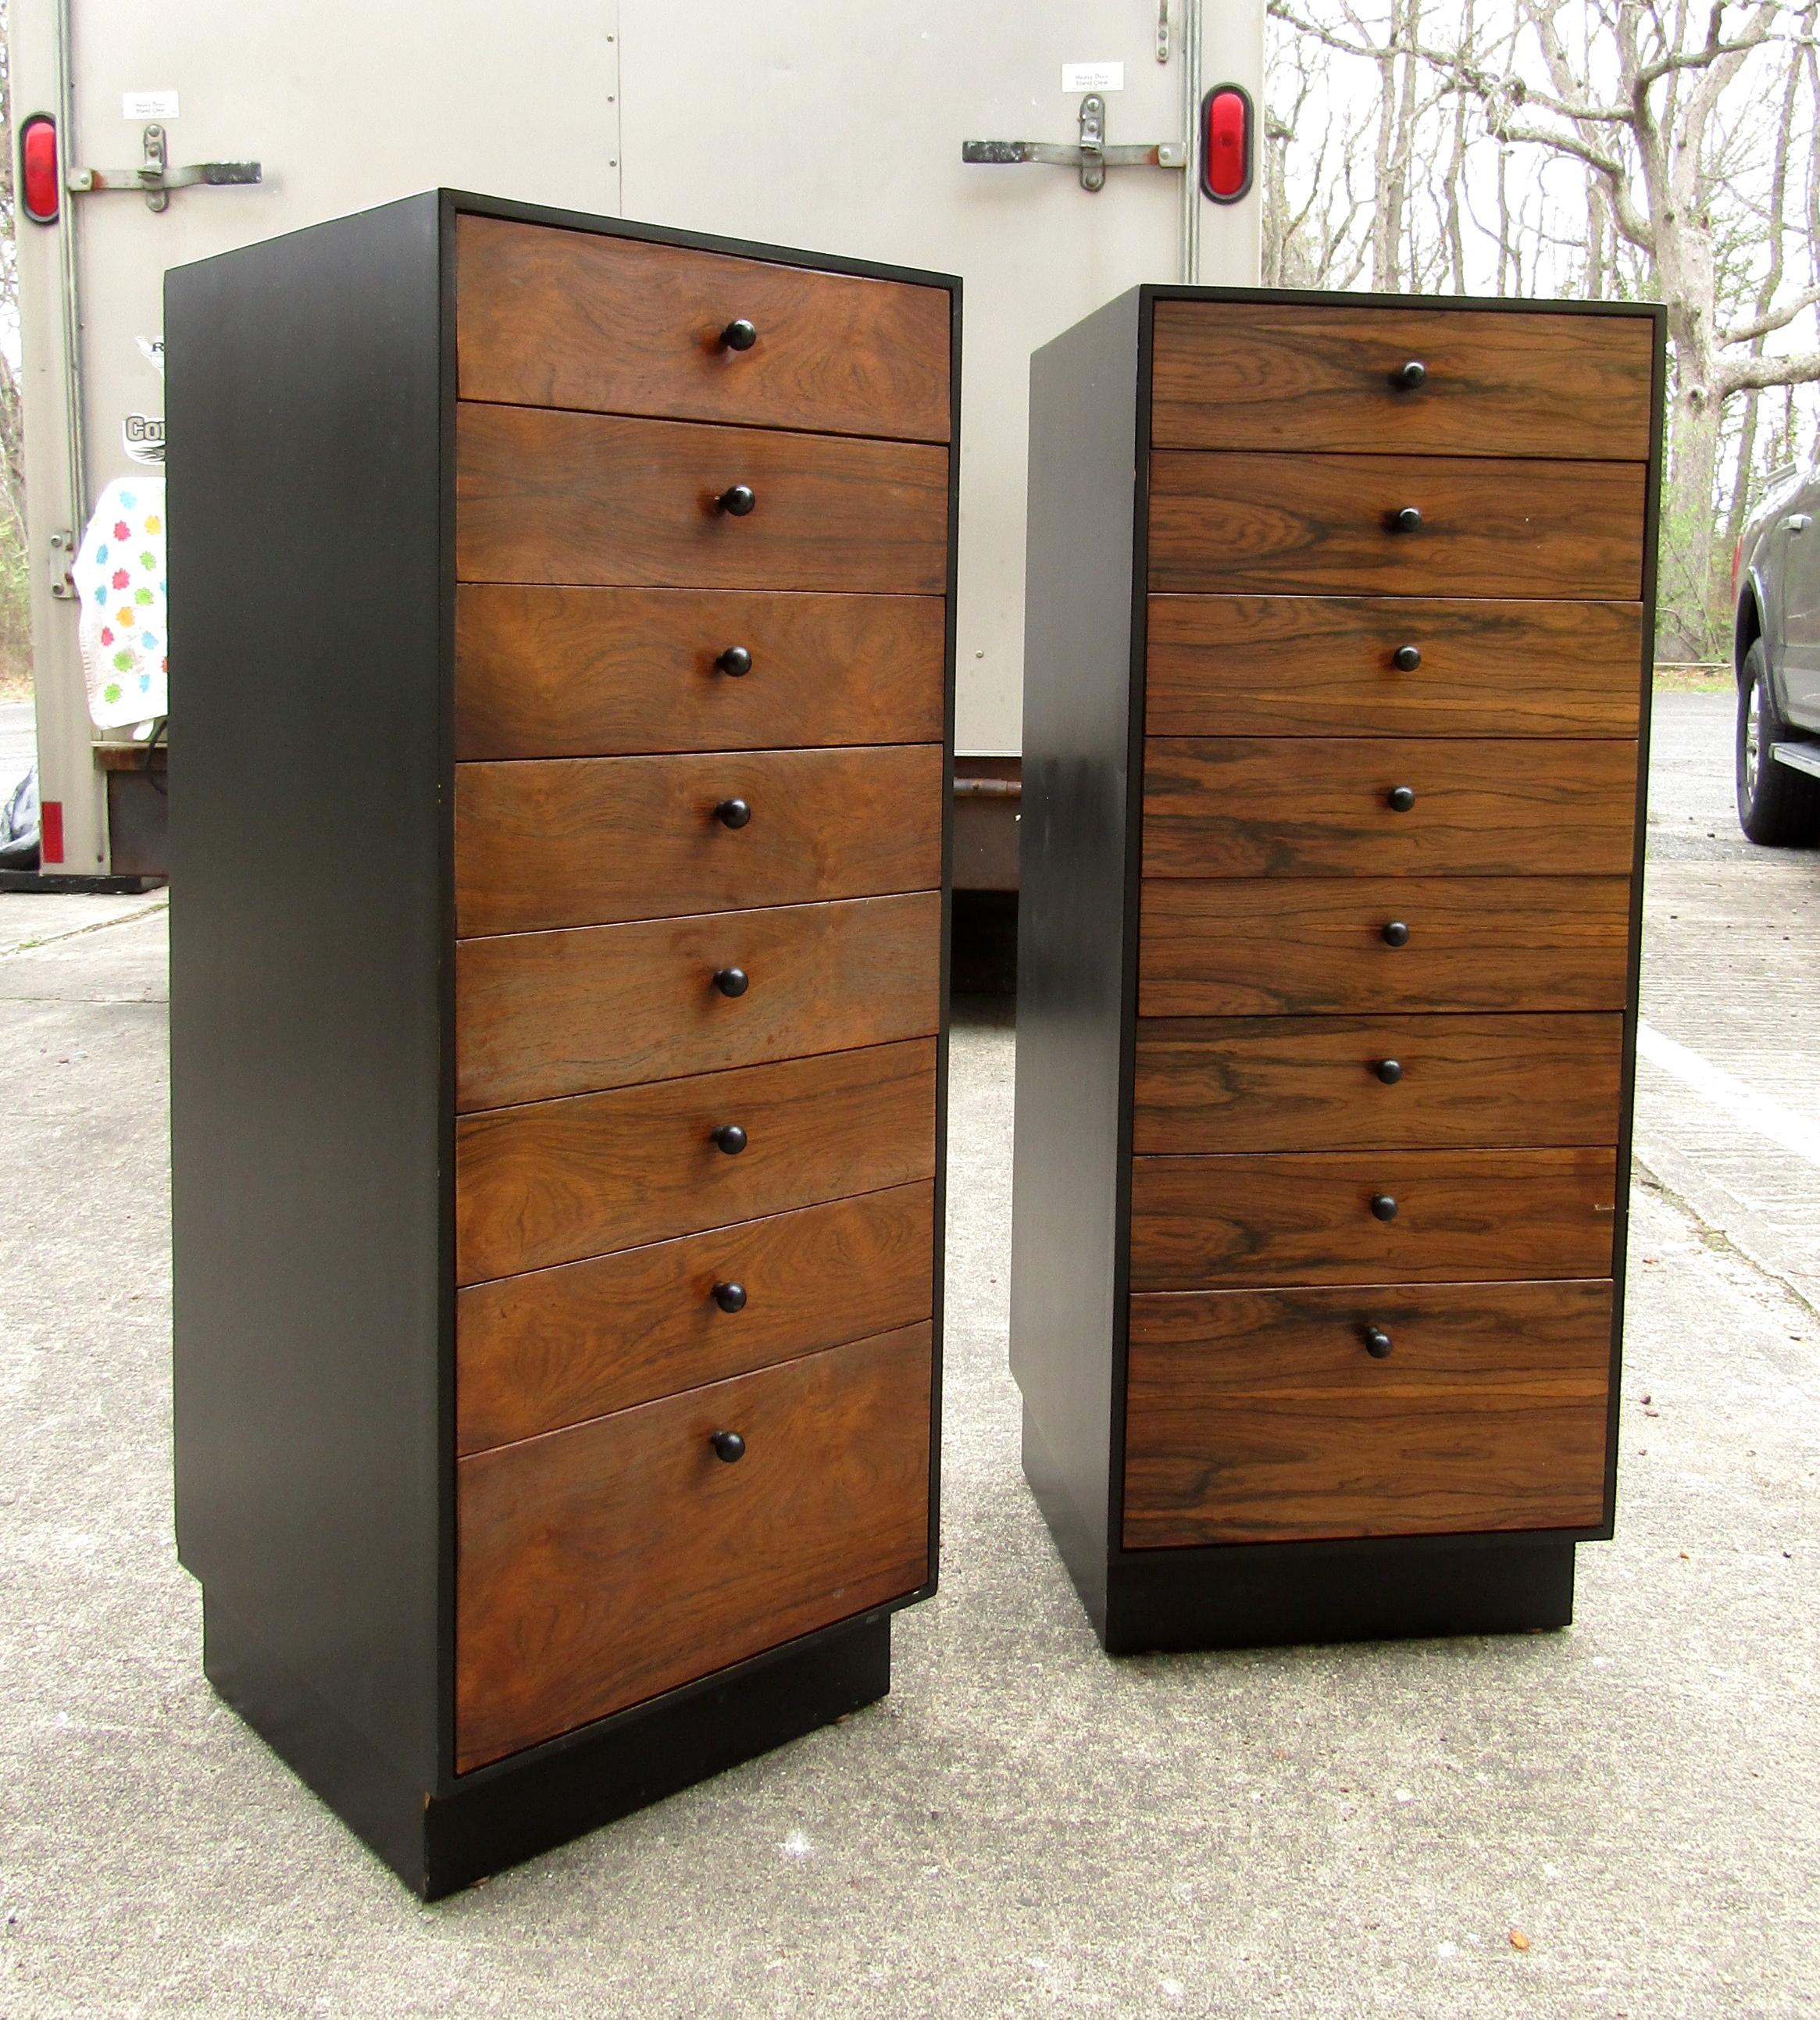 Mid-Century Modern pair of lingerie chests by founder featuring multiple wooden drawers, black round knobs, and sides.

Please confirm the item location (NY or NJ).